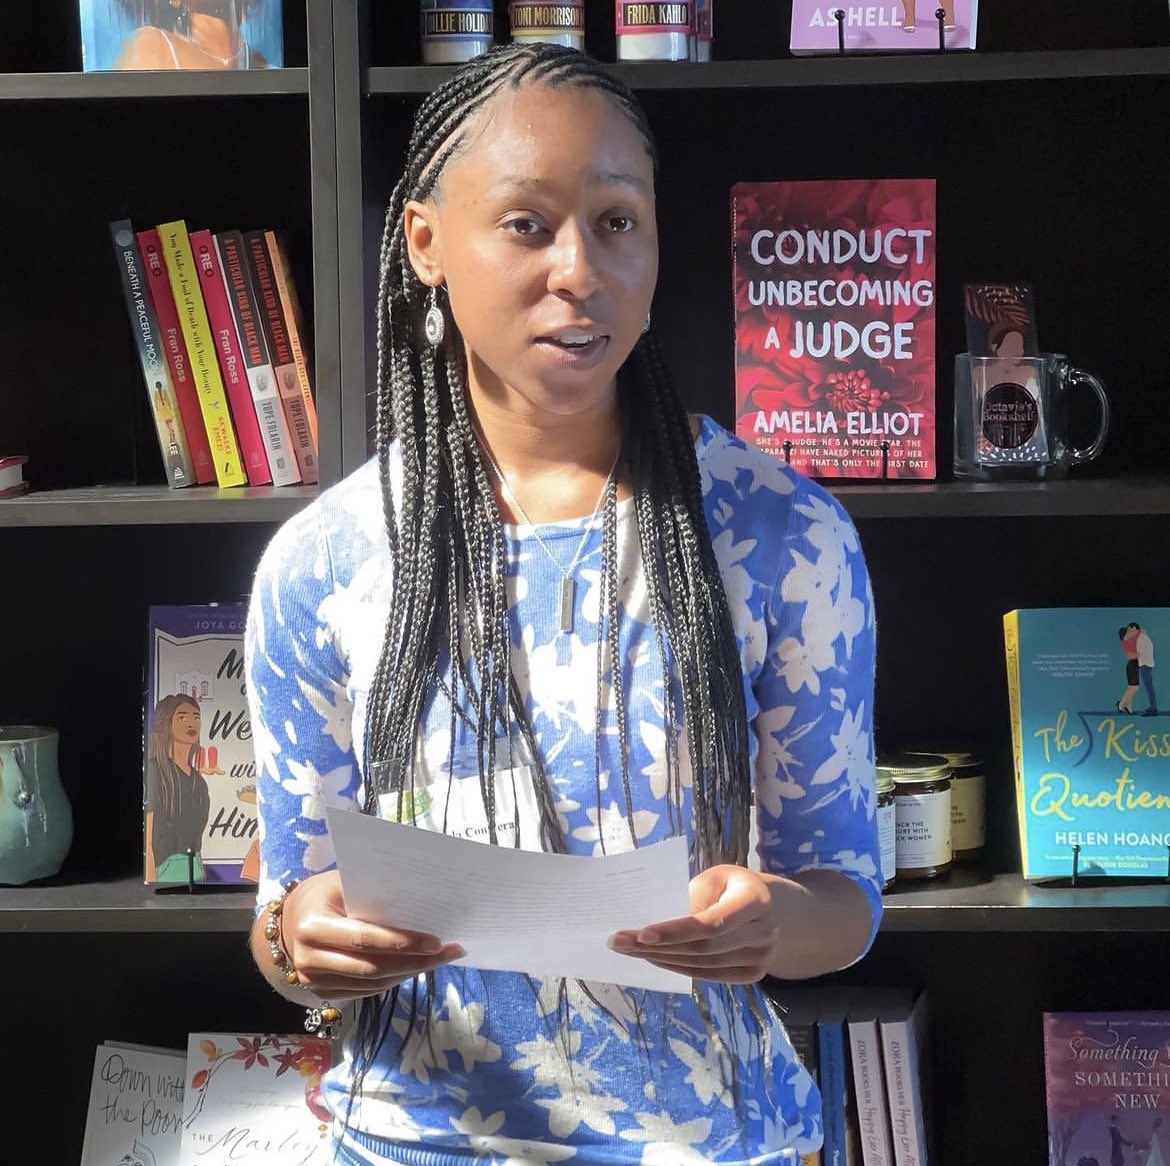 WriteGirl alum Shandela shares her poem “About Me” to chuckles of recognition as we celebrate the launch of our creativity journal “What’s Behind the Blue Door” at @OctaviasBkshelf in Pasadena! #BlueDoor #writingjournal #writingprompts